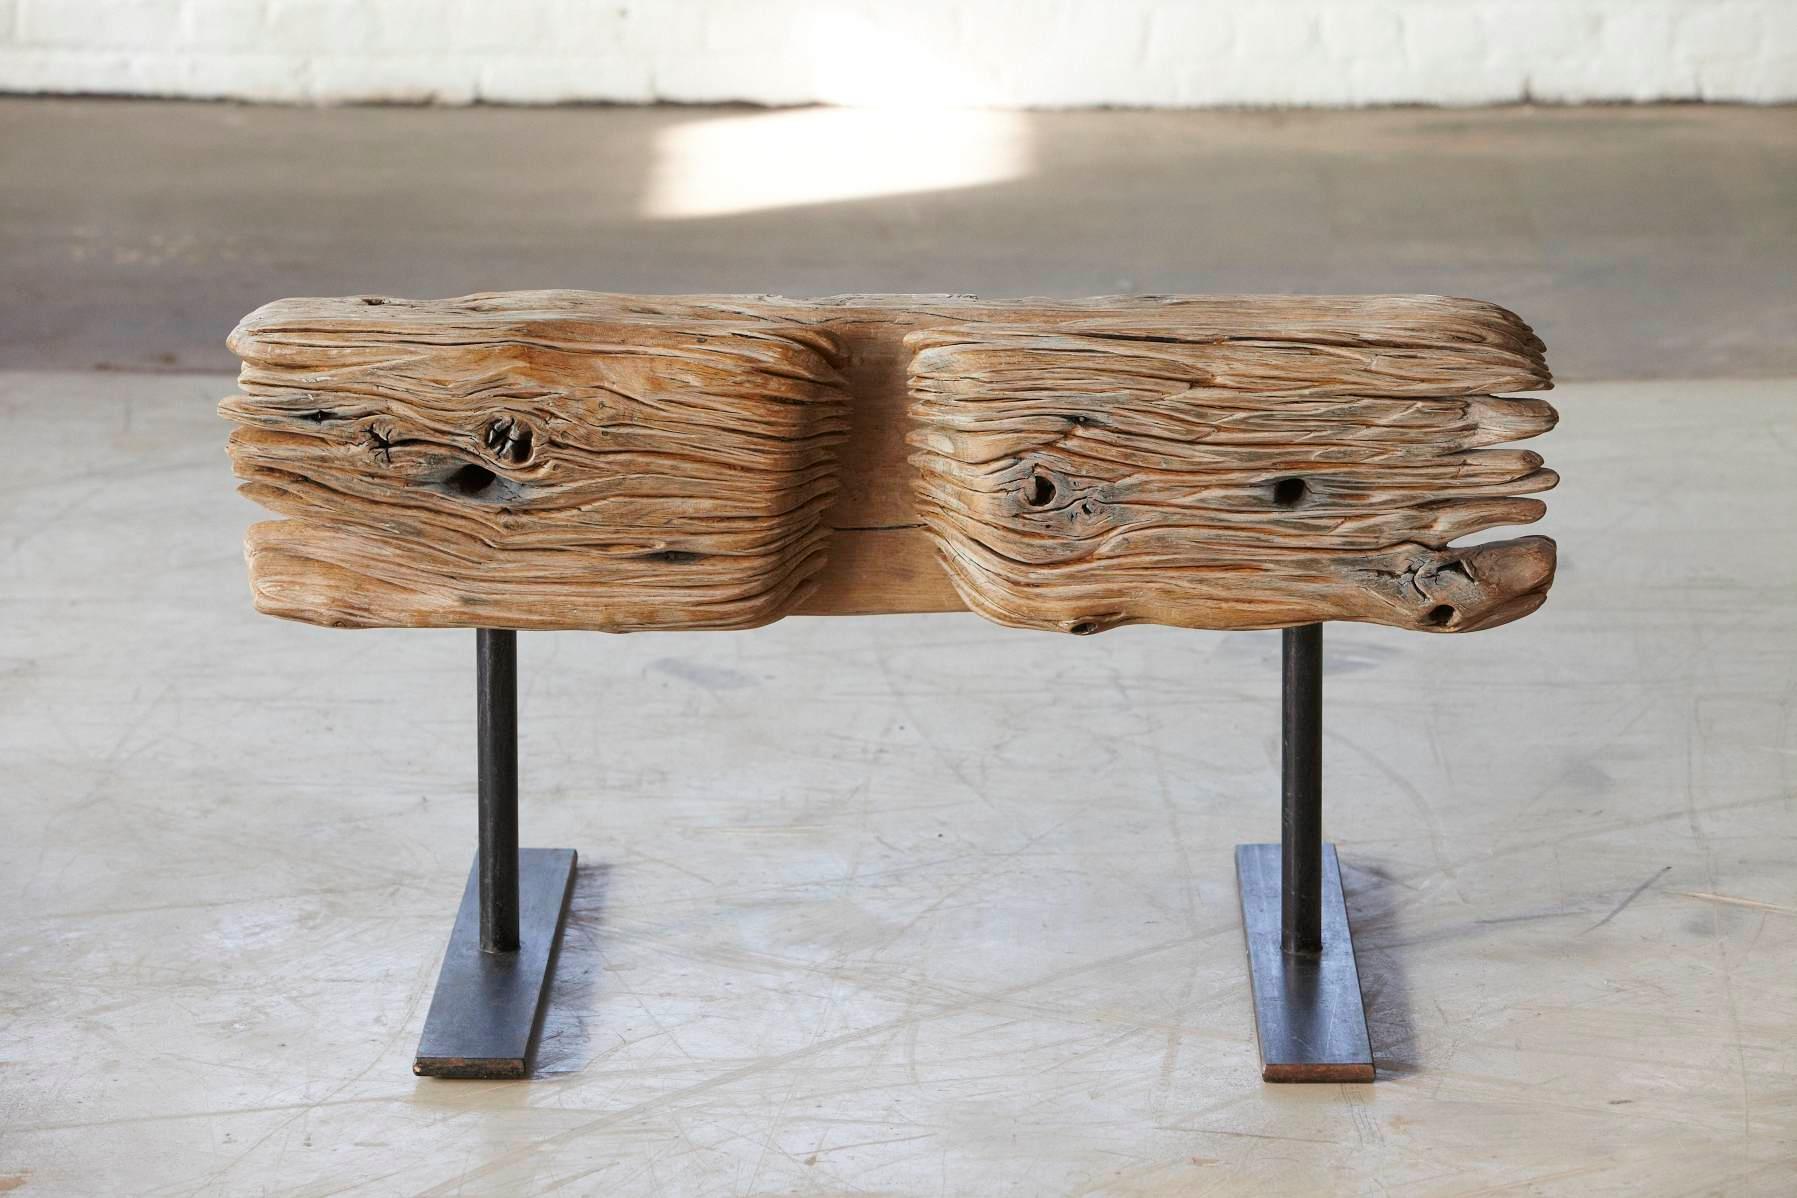 Bank 1 - Bench 1
Bench made from a solid piece of oak mounted on a welded black iron legs by German artist Hanni Dietrich. 
All wood used by the artist is from salvaged oak beams or naturally fallen trees.
The integrated iron handles were as found,